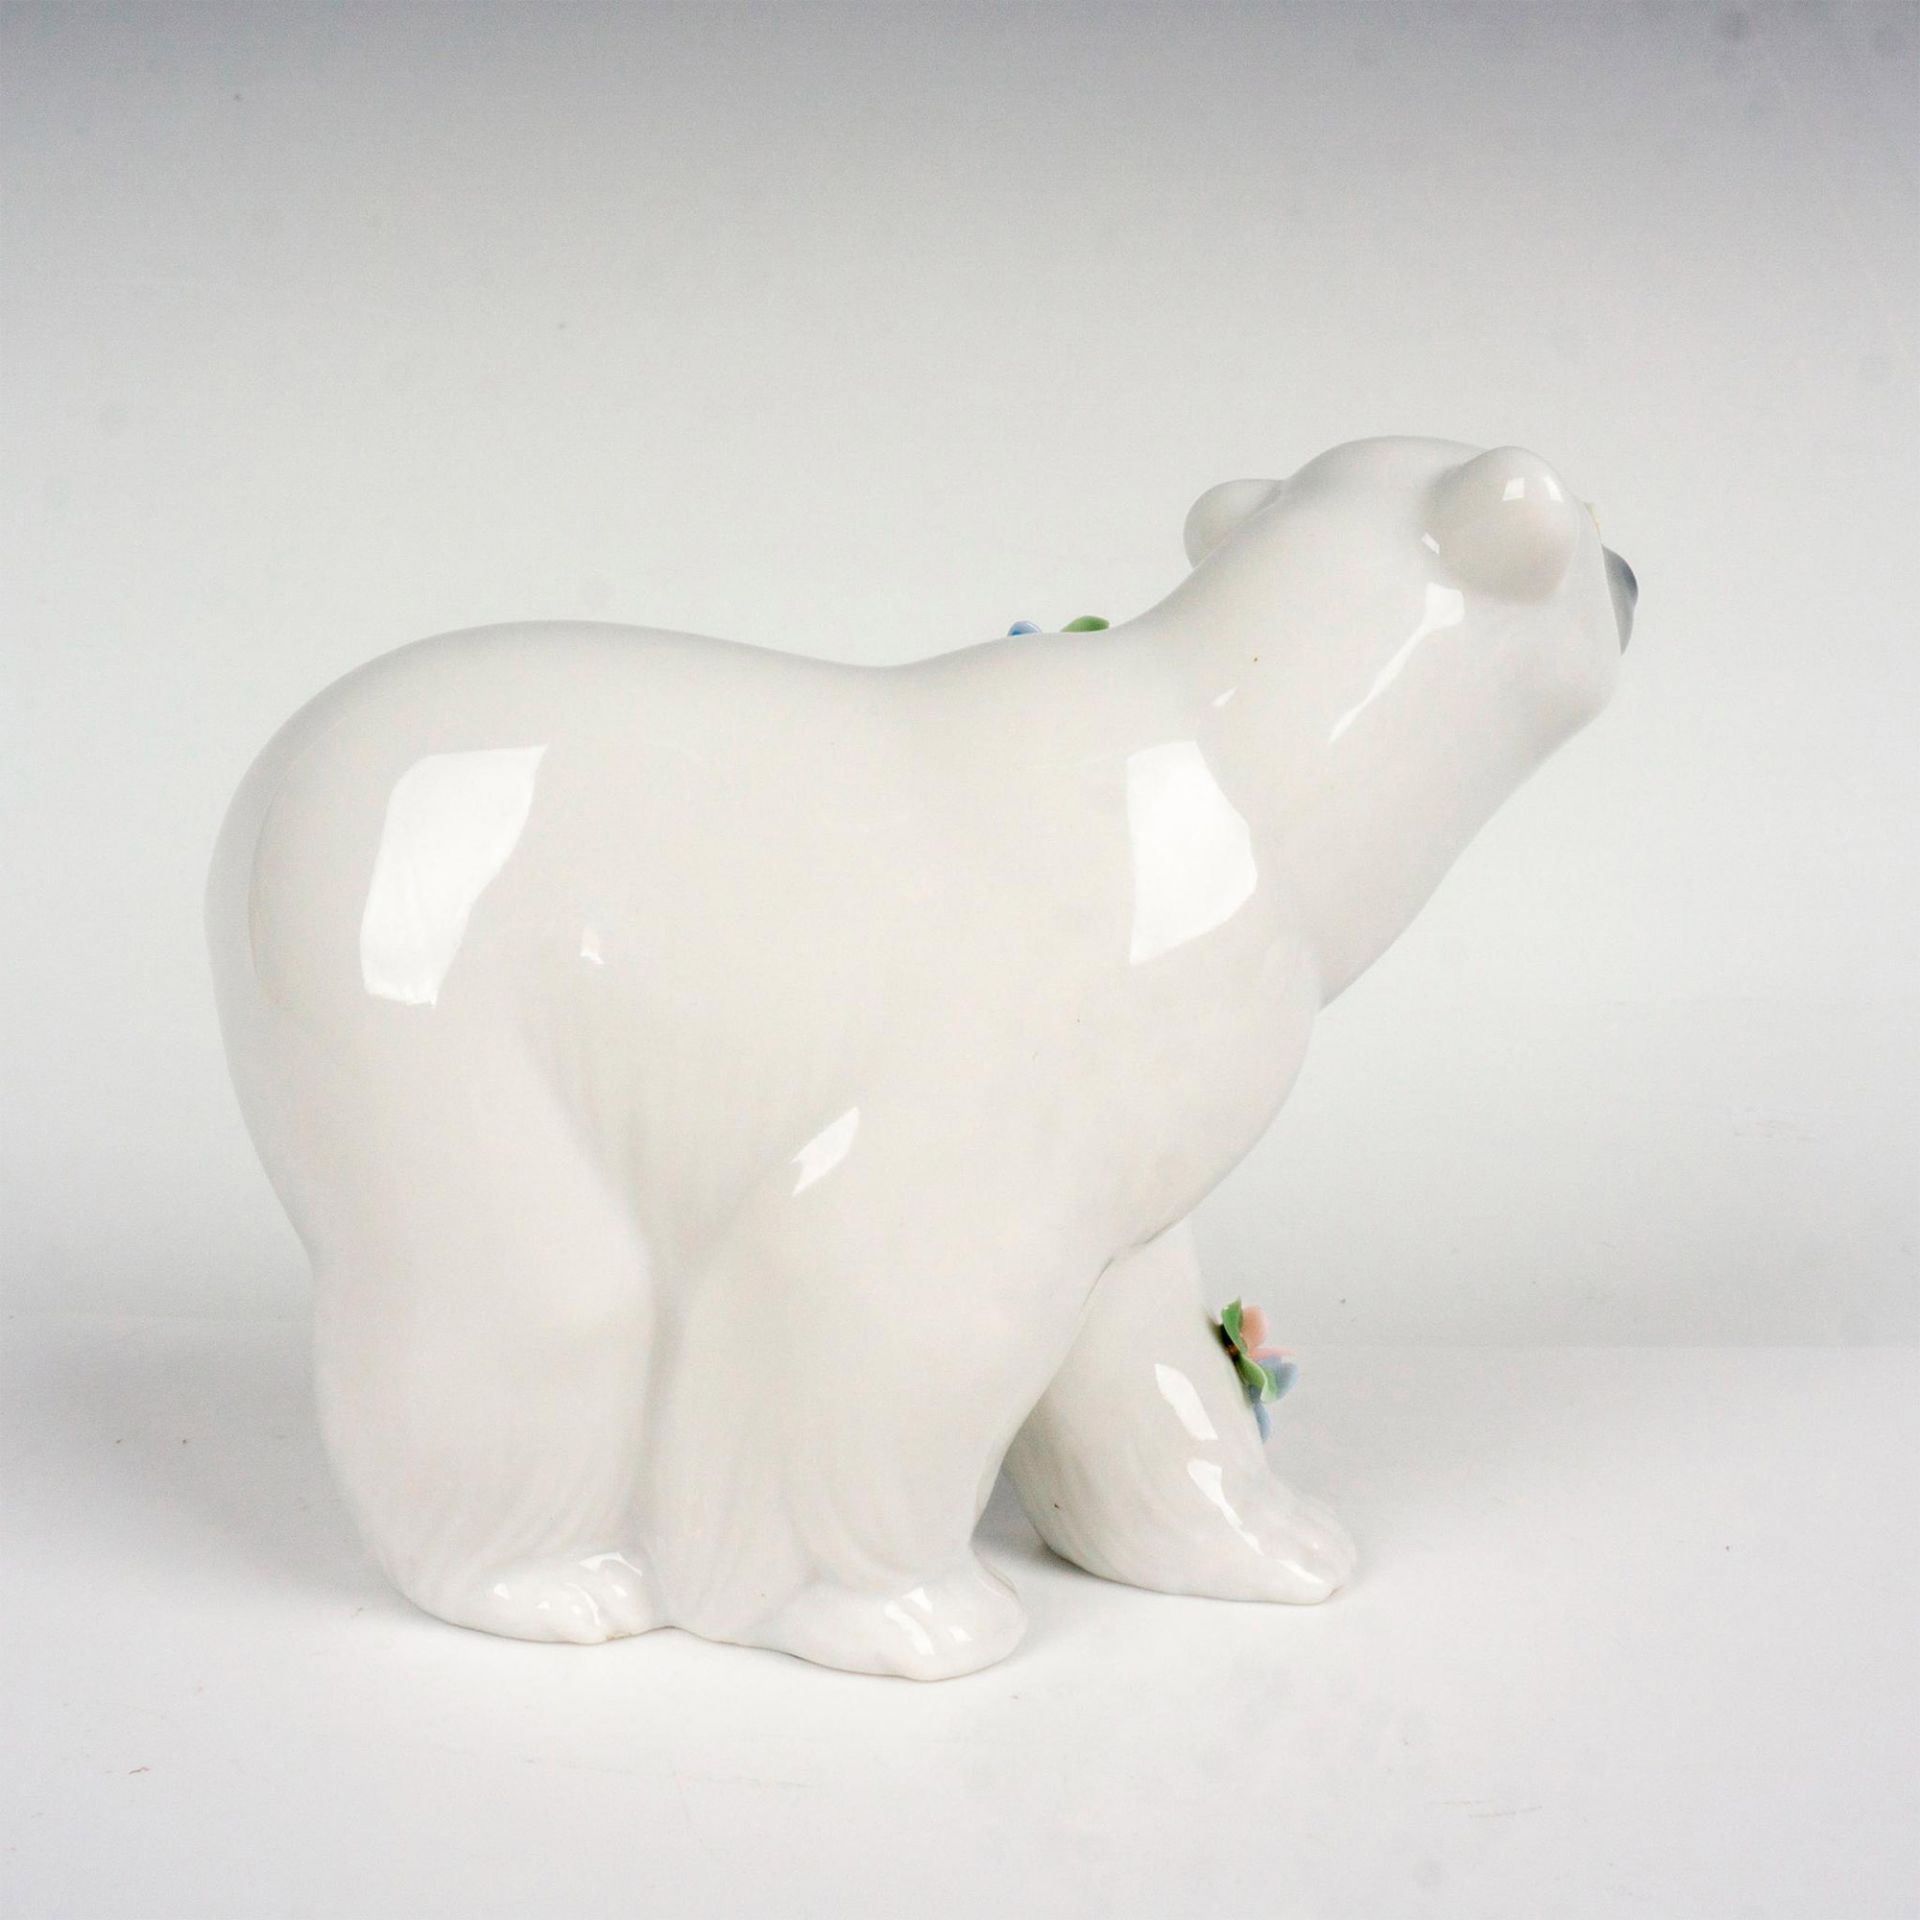 Lladro Porcelain Figurine, Attentive Polar Bear with Flowers 1006354 - Image 2 of 4